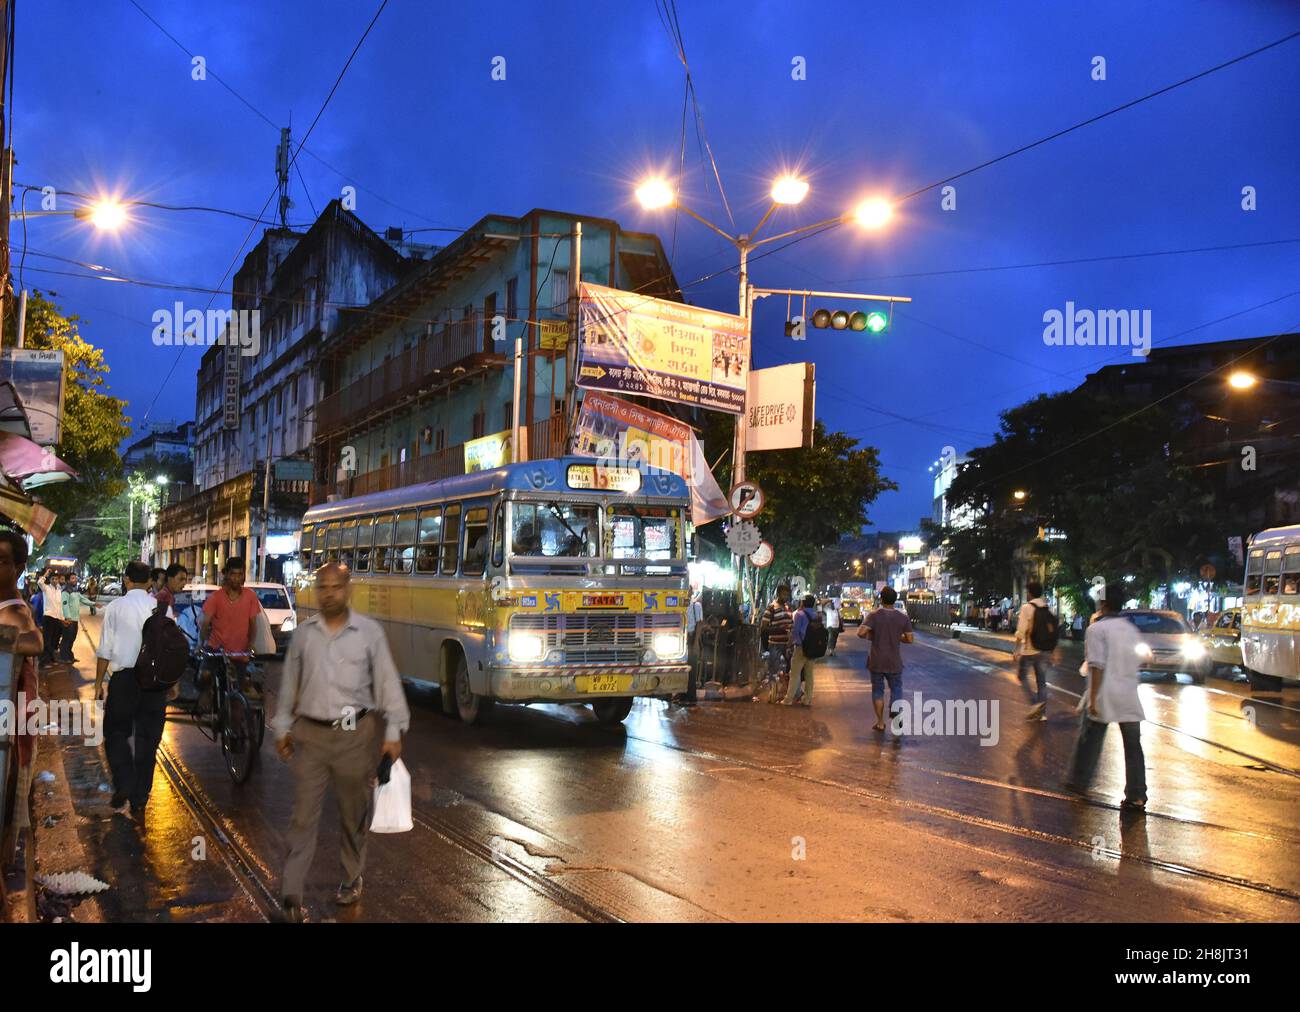 Streets at night in Kolkata. Kolkata (formerly Calcutta) is the capital of India's West Bengal state. Founded as an East India Company trading post, it was India's capital under the British Raj from 1773–1911. Today it’s known for its grand colonial architecture, art galleries and cultural festivals. It’s also home to Mother House, headquarters of the Missionaries of Charity, founded by Mother Teresa, whose tomb is on site. Stock Photo